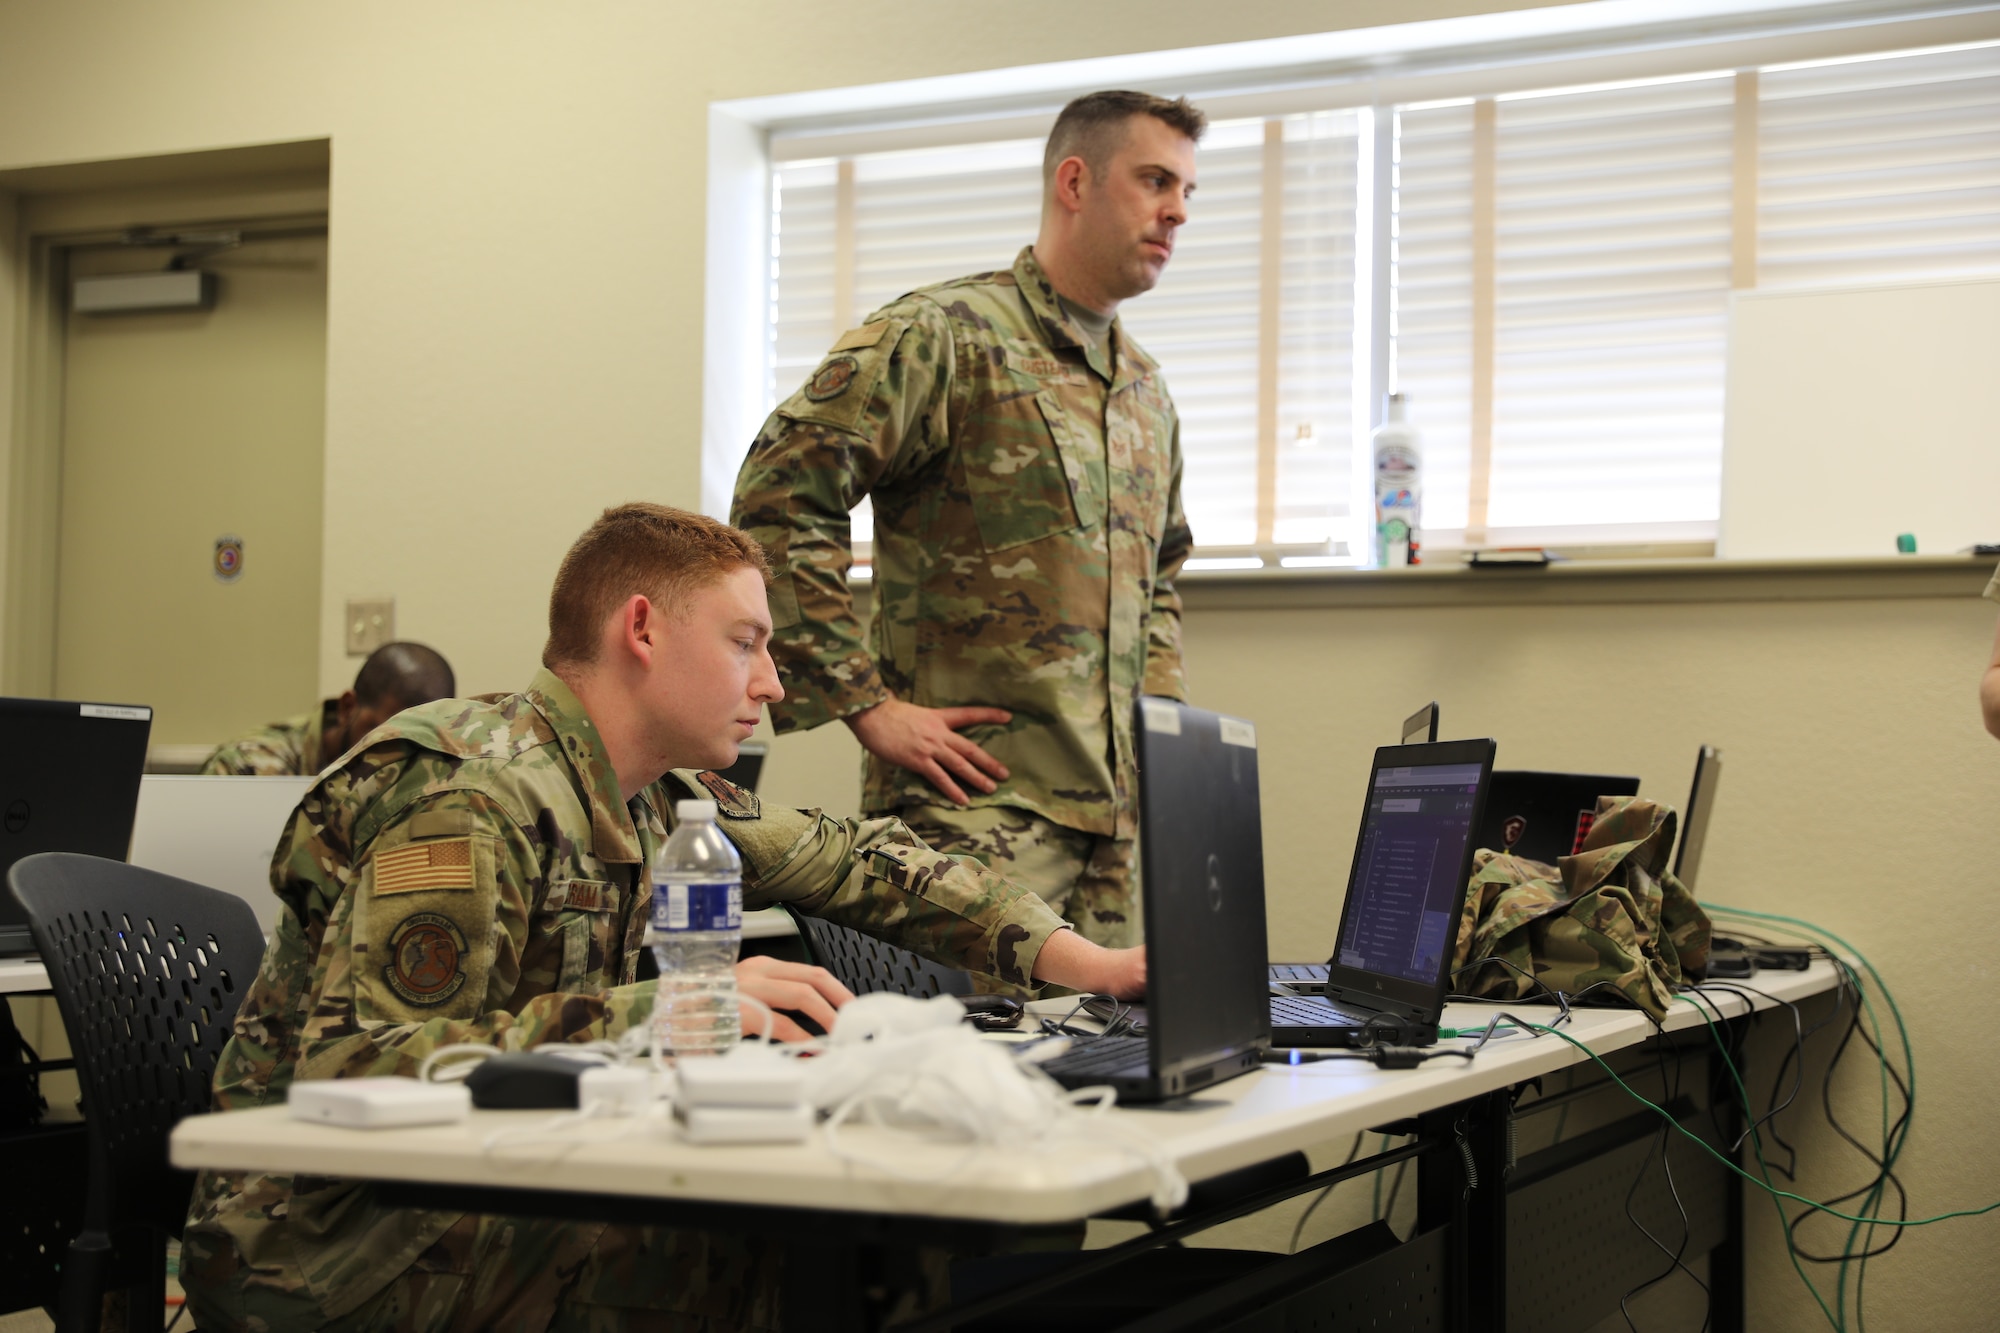 U.S. Air Force Staff Sgt. Austin Cram and Staff Sgt. Nicholas Custead with 175th Cyberspace Operations Squadron, 175th Wing, Maryland Air National Guard, based in Middle River, Maryland, prepare their work stations at Southern Strike 2022 at the Gulfport Combat Readiness Training Center Gulfport, Mississippi, April 27, 2022. Southern Strike 2022 is an excellent test of joint teams' ability to conduct major campaign, crisis response and security cooperation operations. (U.S. Army National Guard photo by Spc. Benjamin Tomlinson)